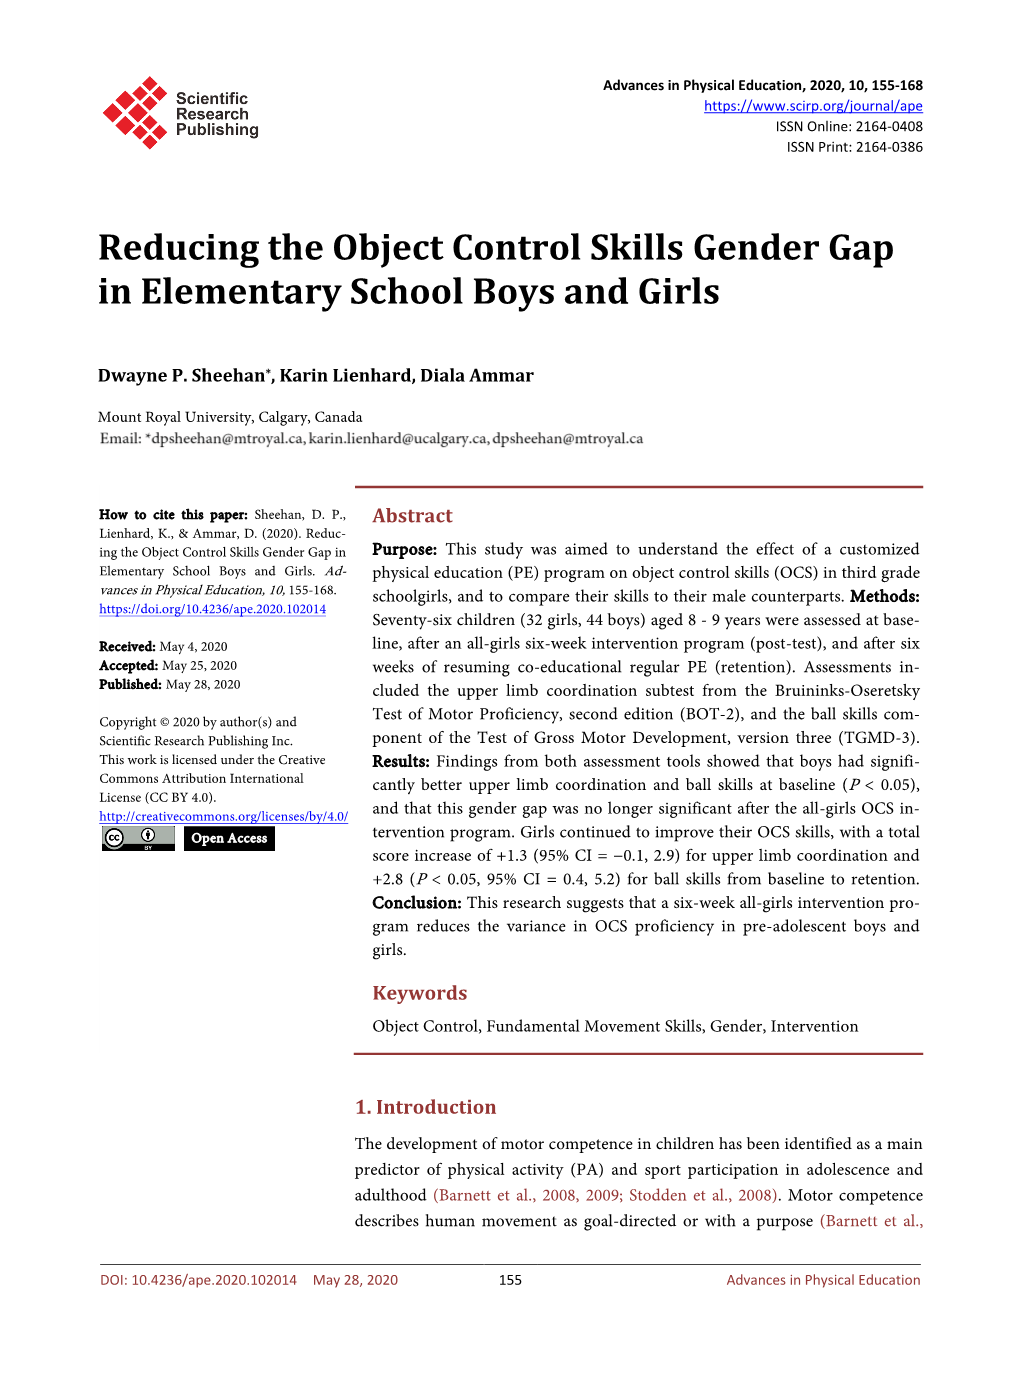 Reducing the Object Control Skills Gender Gap in Elementary School Boys and Girls